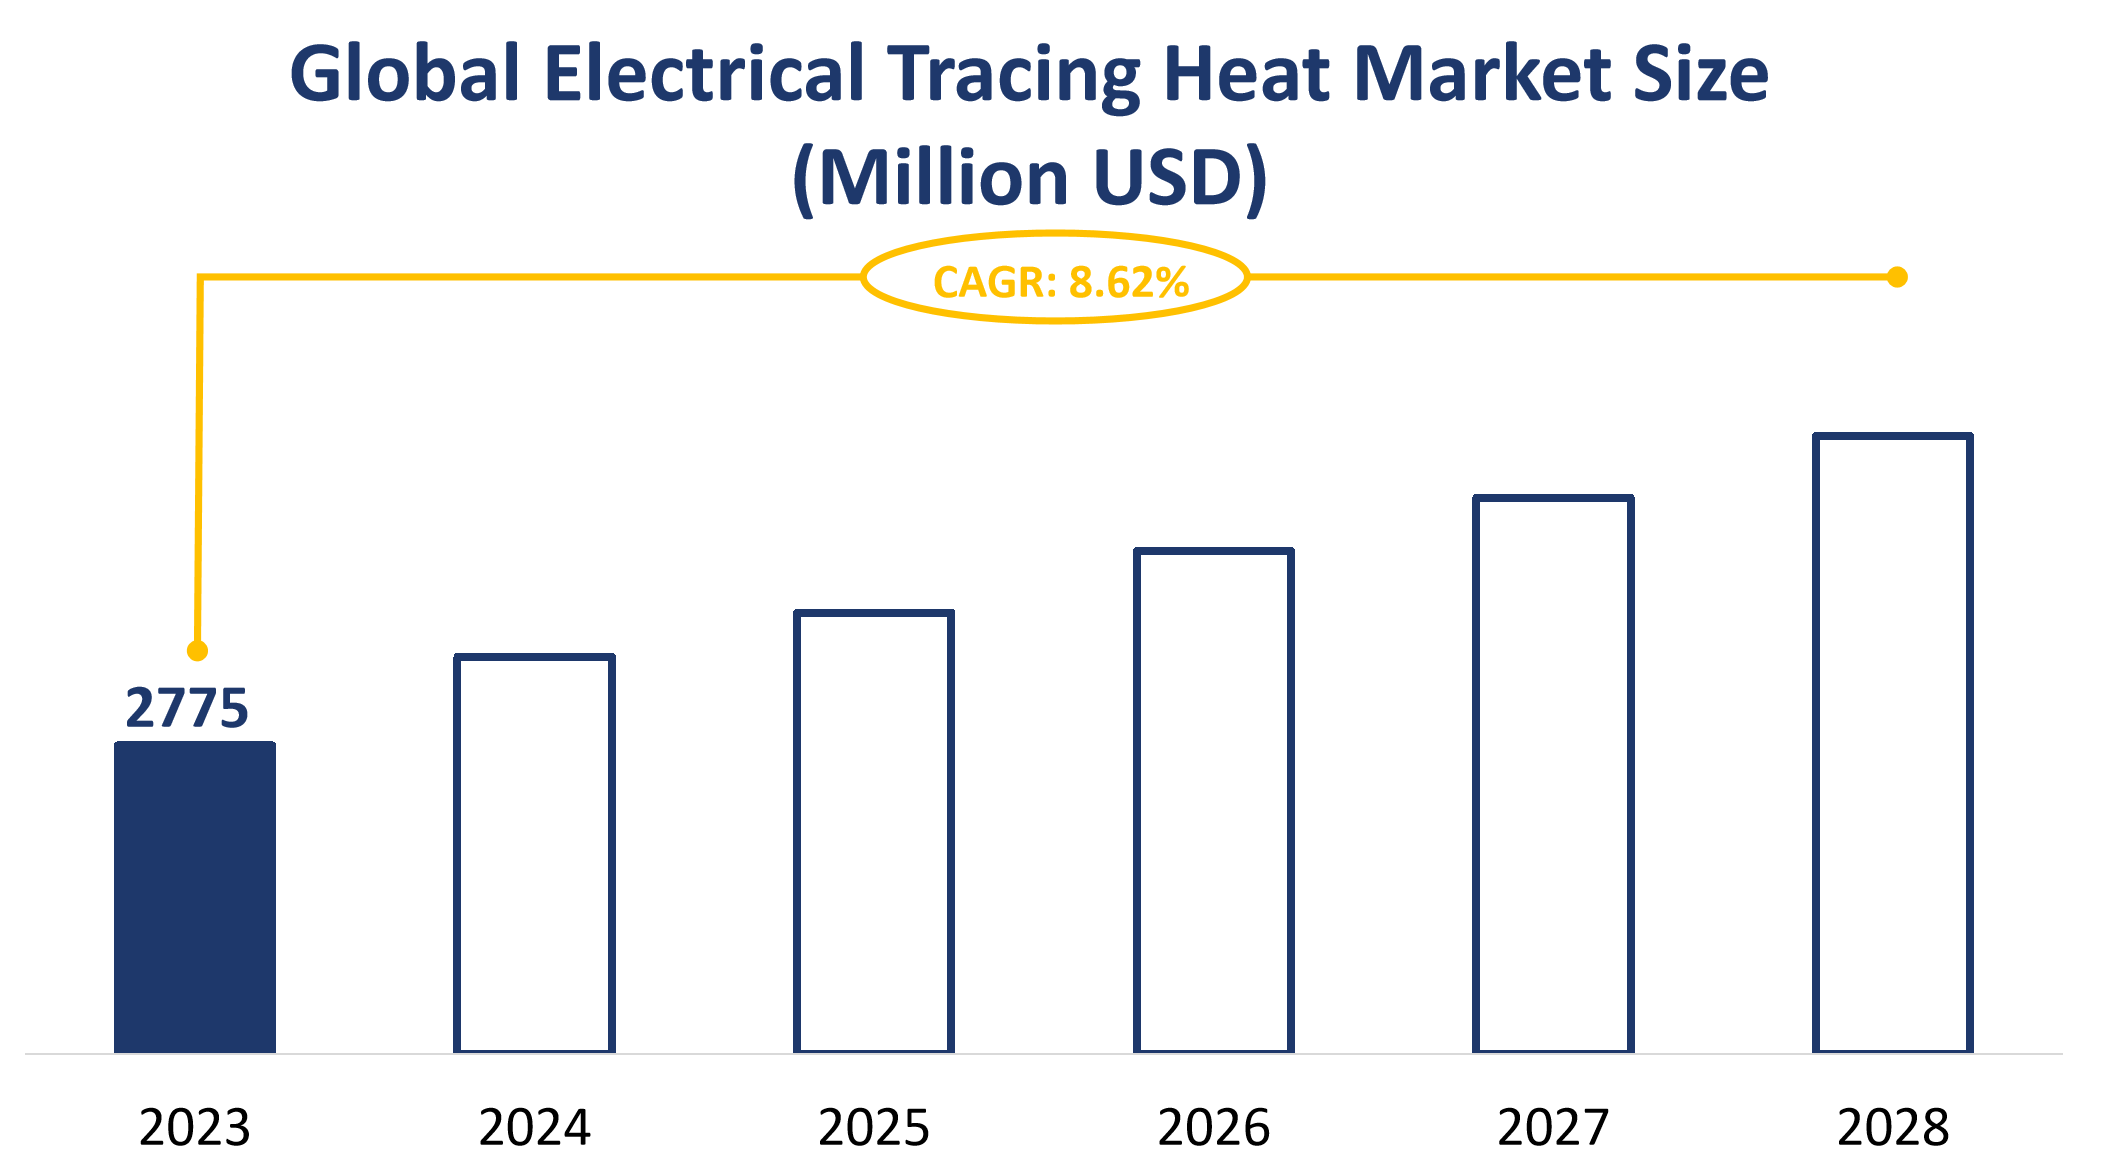 Global Electrical Tracing Heat Market Size (Million USD)